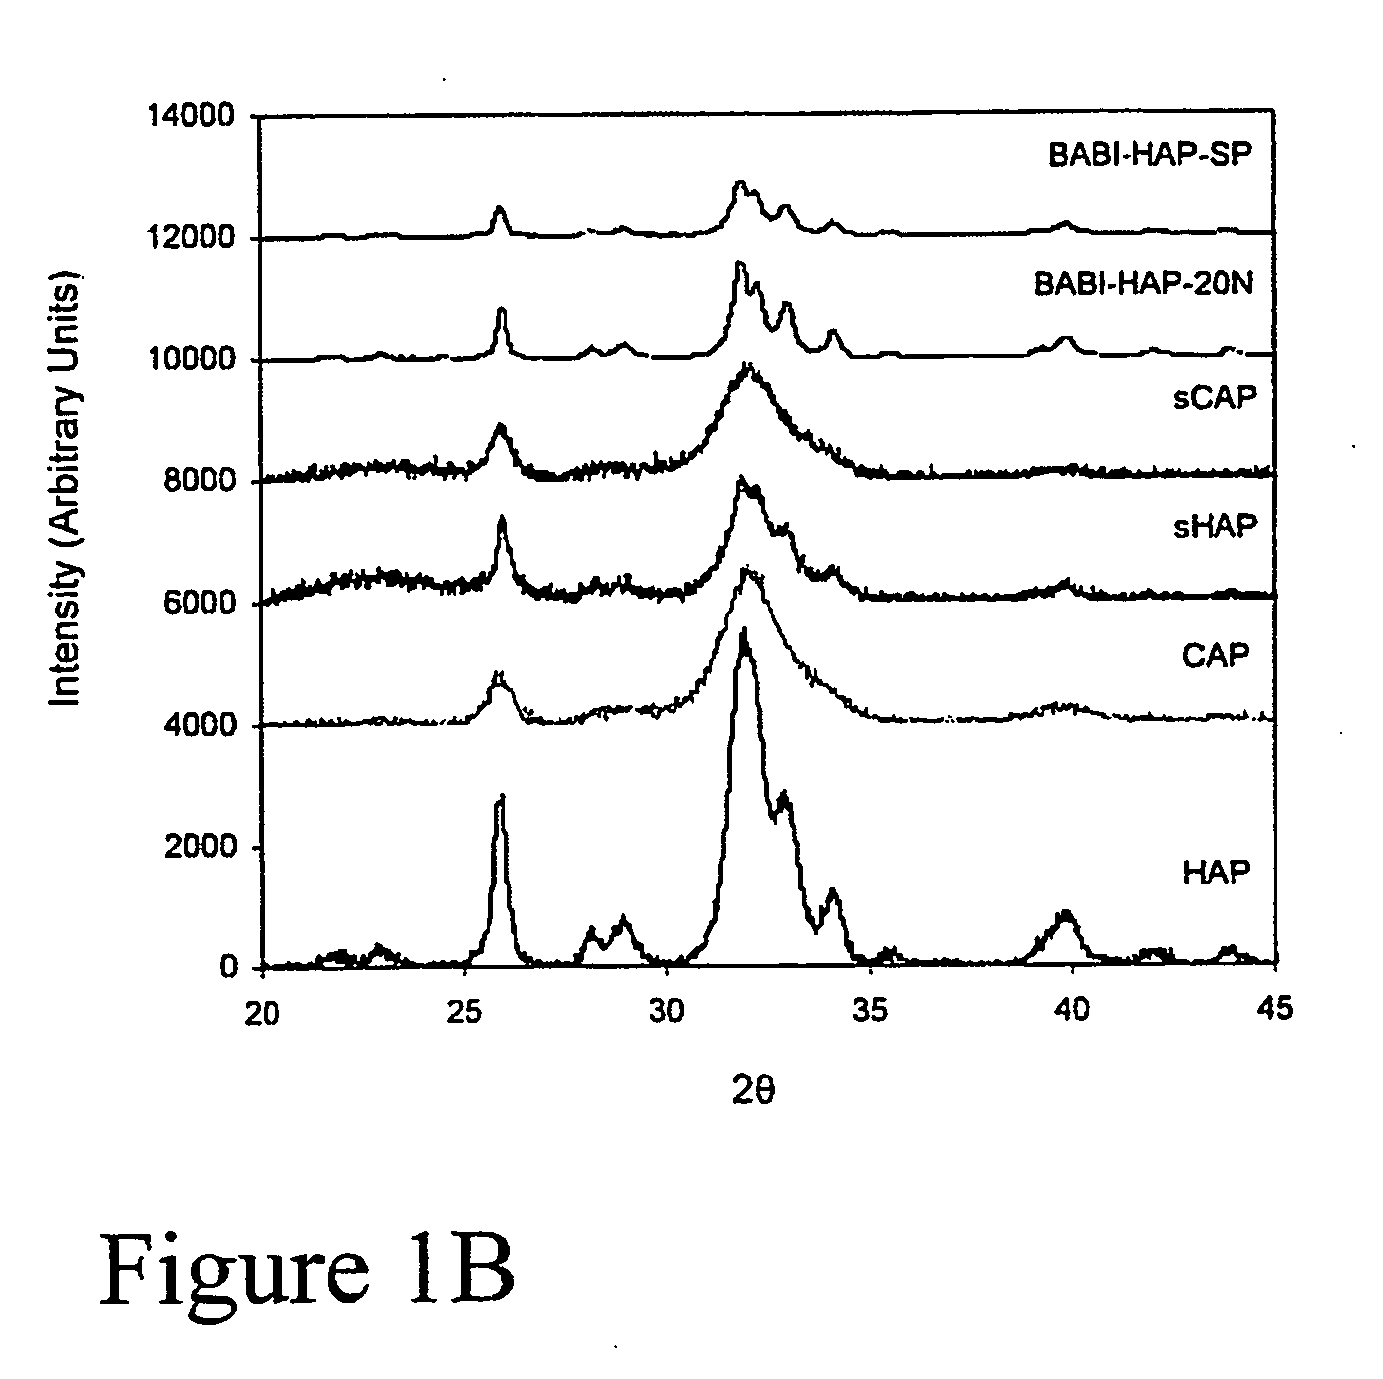 Composite materials for controlled release of water soluble products